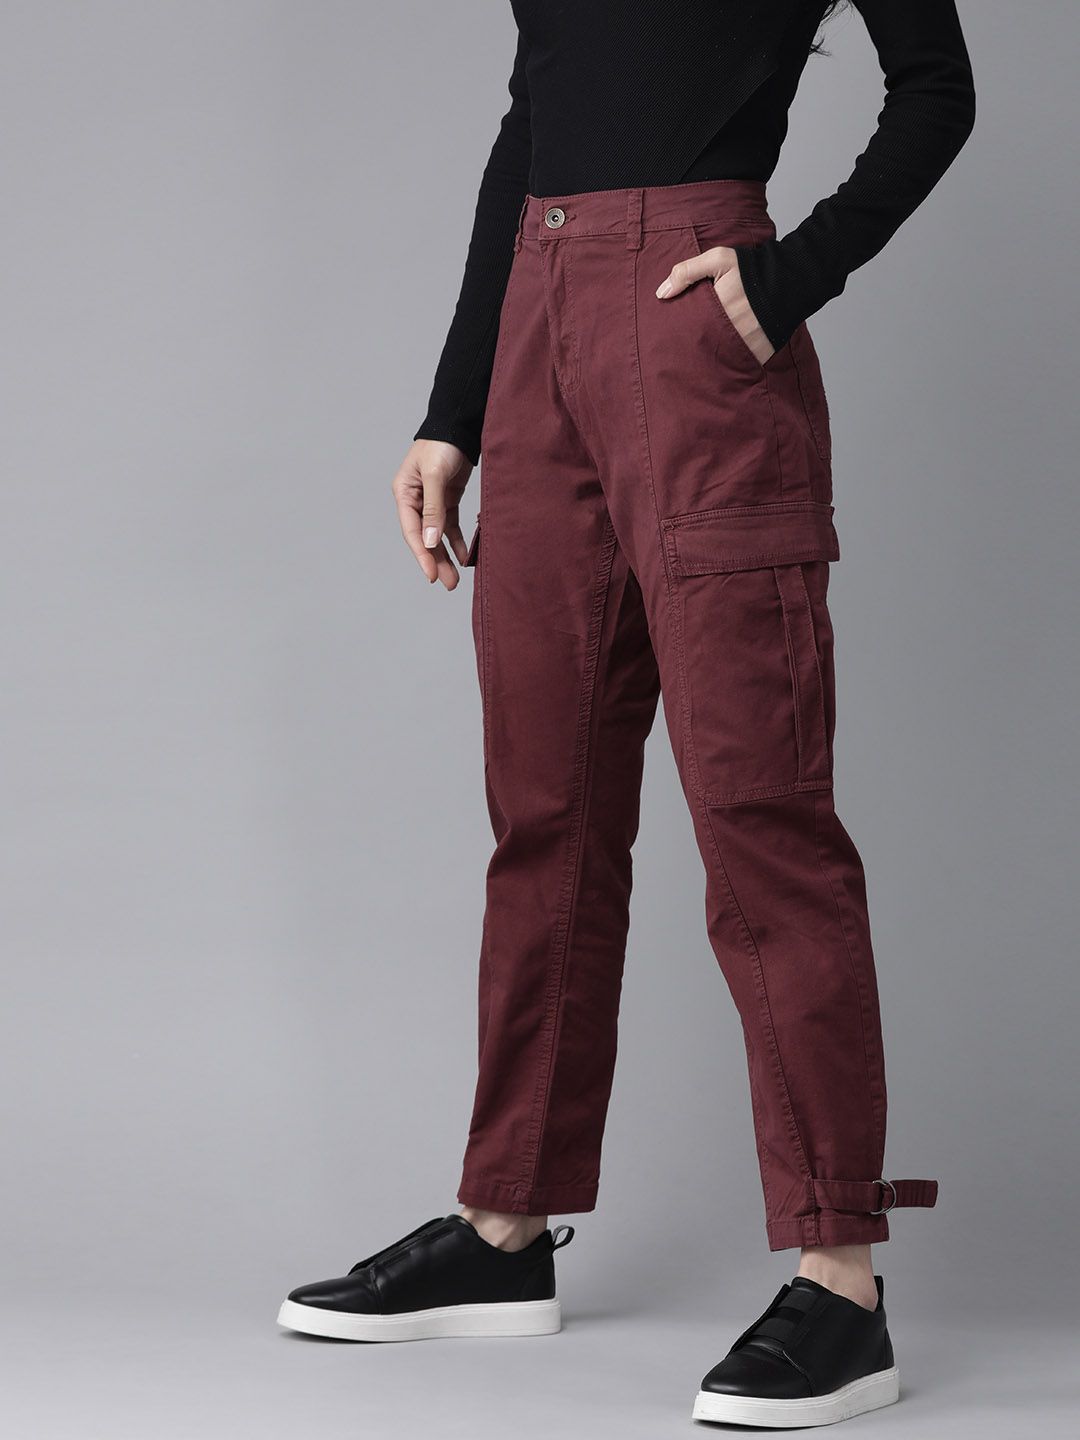 The Roadster Lifestyle Co Women Burgundy Relaxed Fit Solid Cargos Price in India